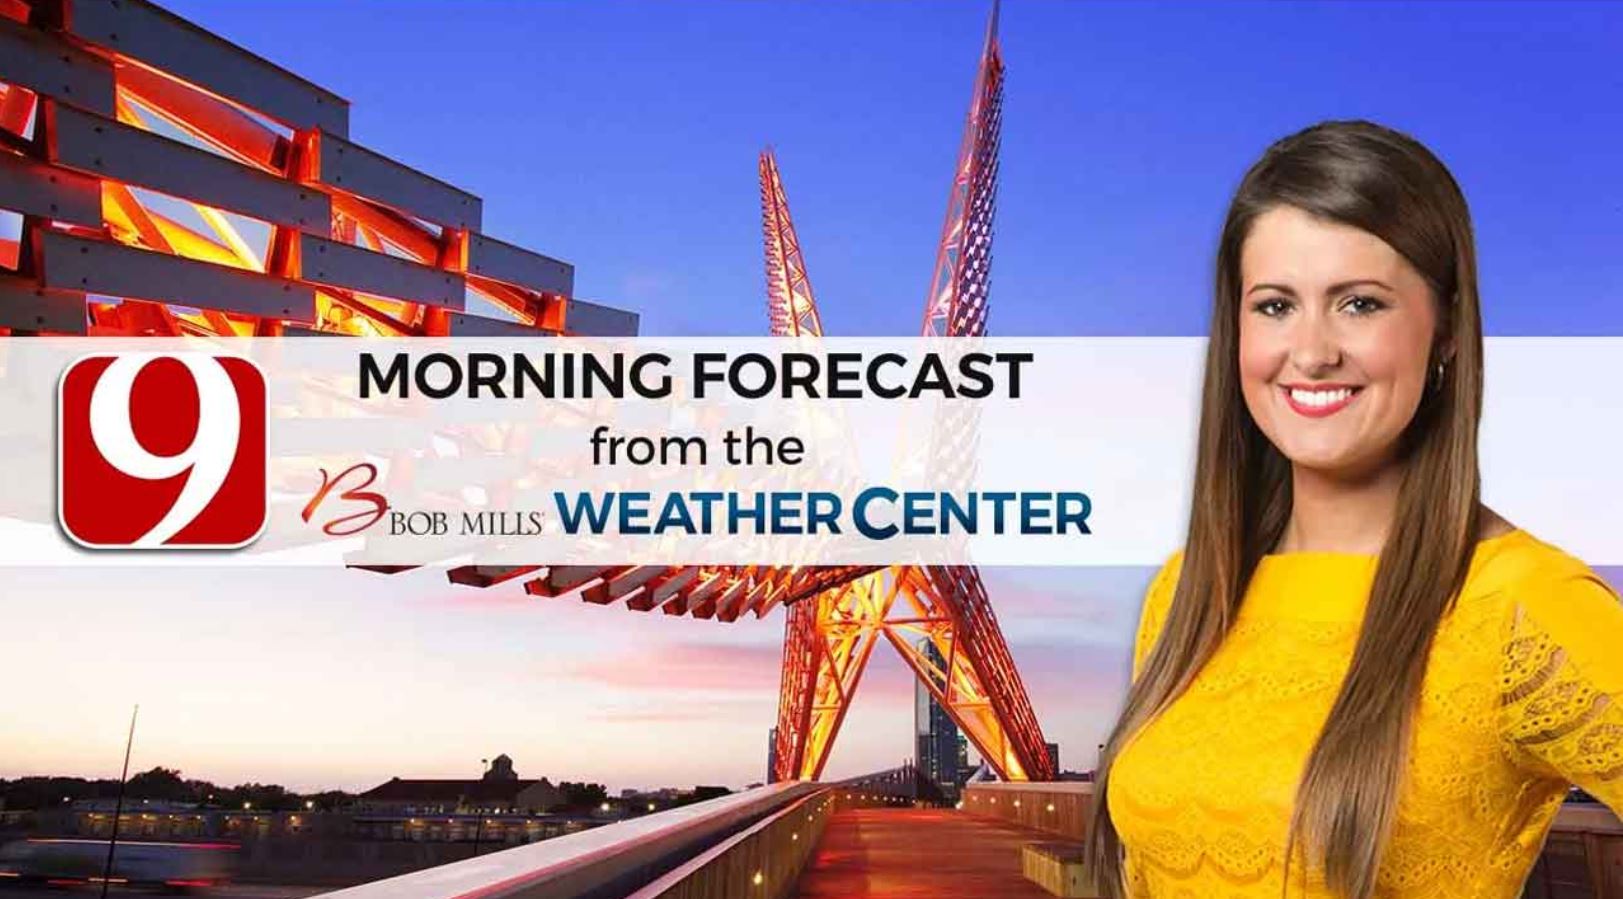 Lacey's Thursday Morning Forecast